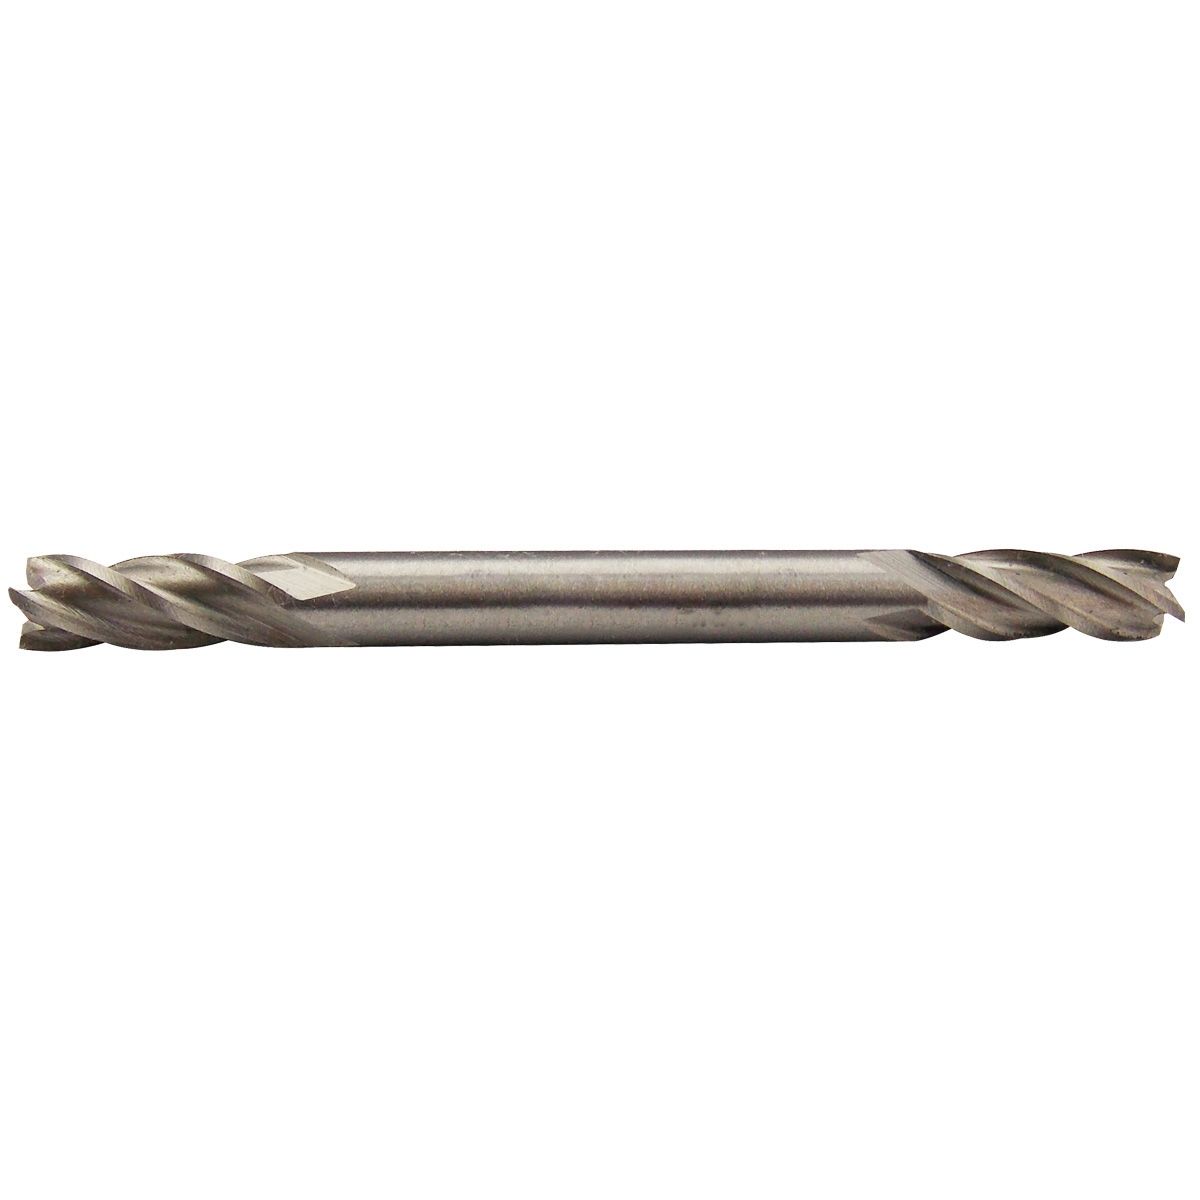 1/16" 4 FLUTE MINI HIGH SPEED STEEL DOUBLE END END MILL (5831-0018)